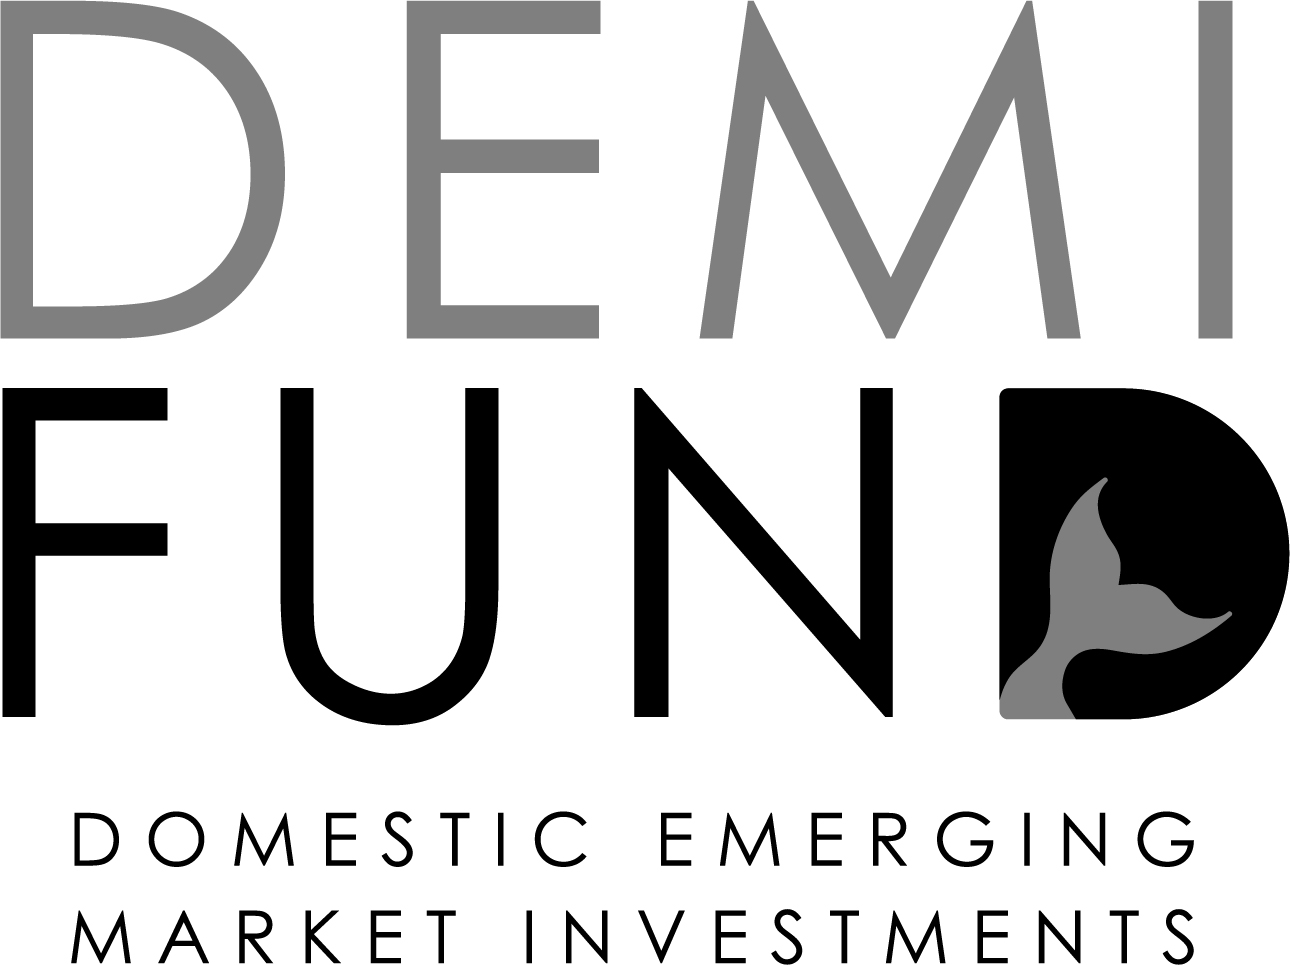 Domestic Emerging Market Investments Fund